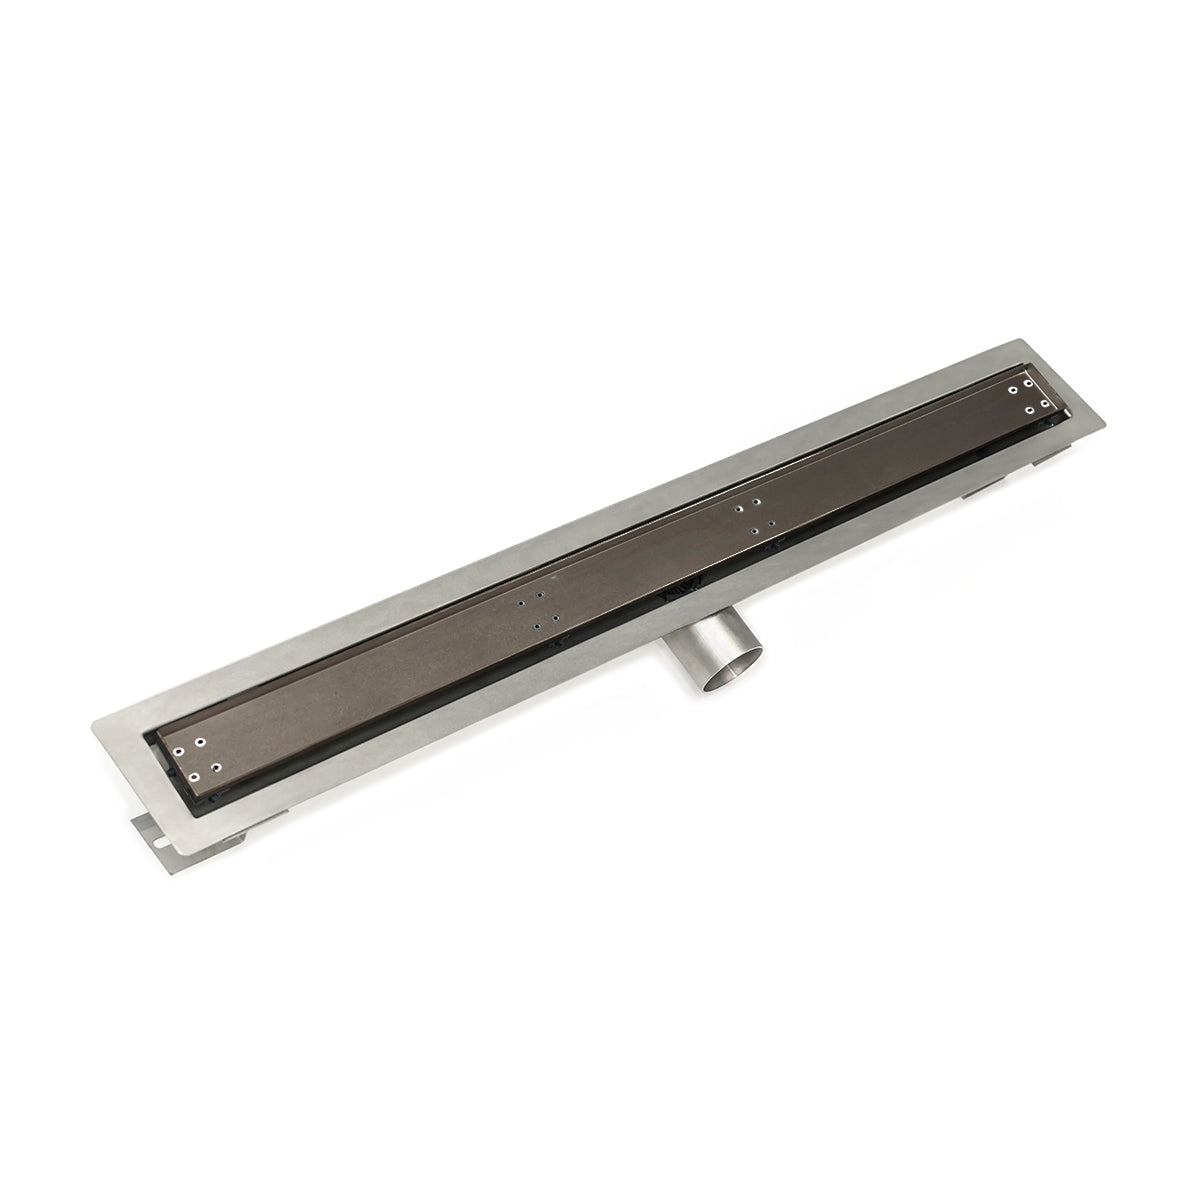 Infinity Drain 48" FT Series Side Outlet Linear Drain Kit with Tile Insert Frame